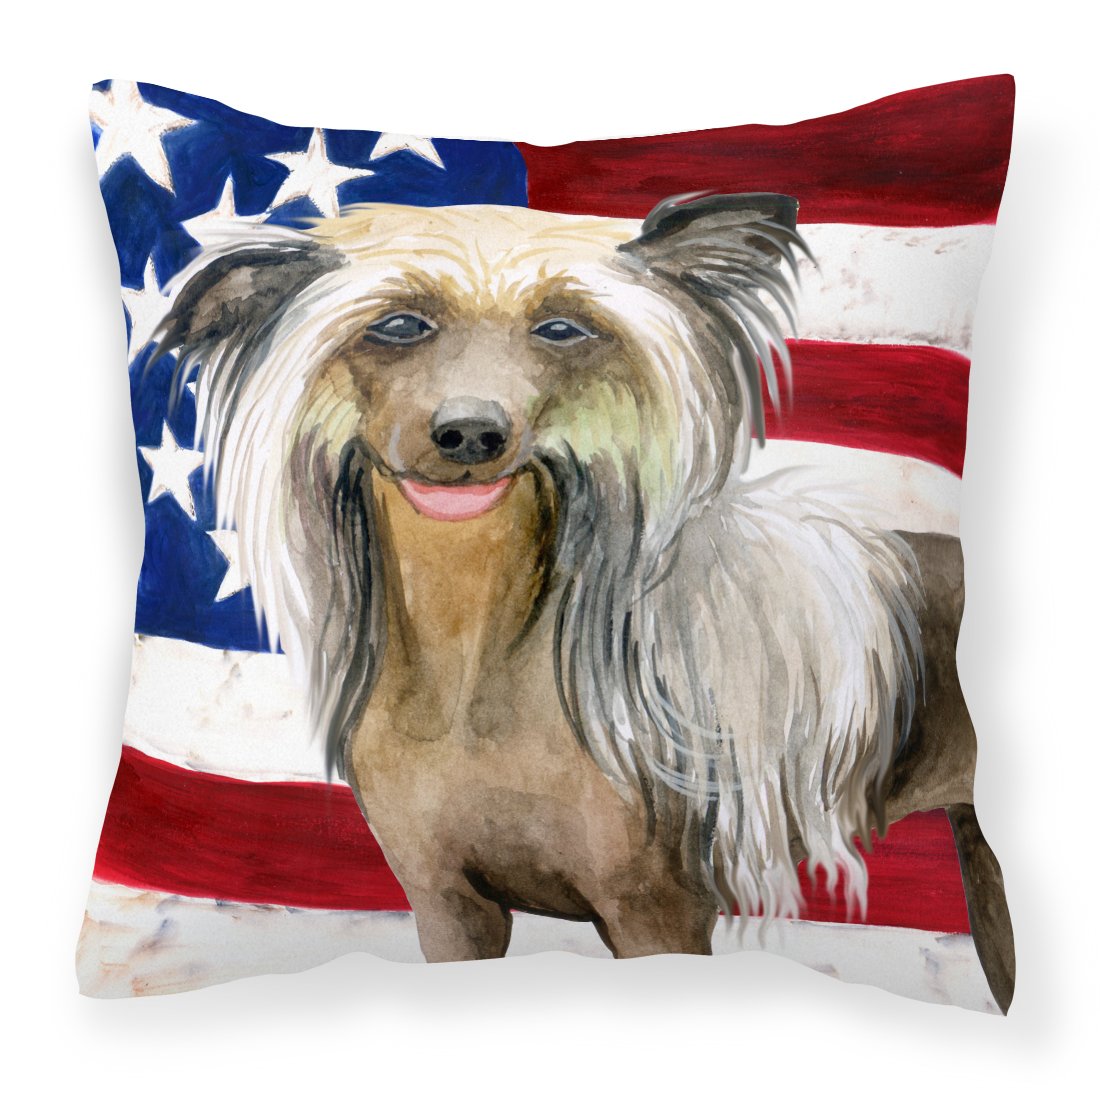 Chinese Crested Patriotic Fabric Decorative Pillow BB9659PW1818 by Caroline's Treasures